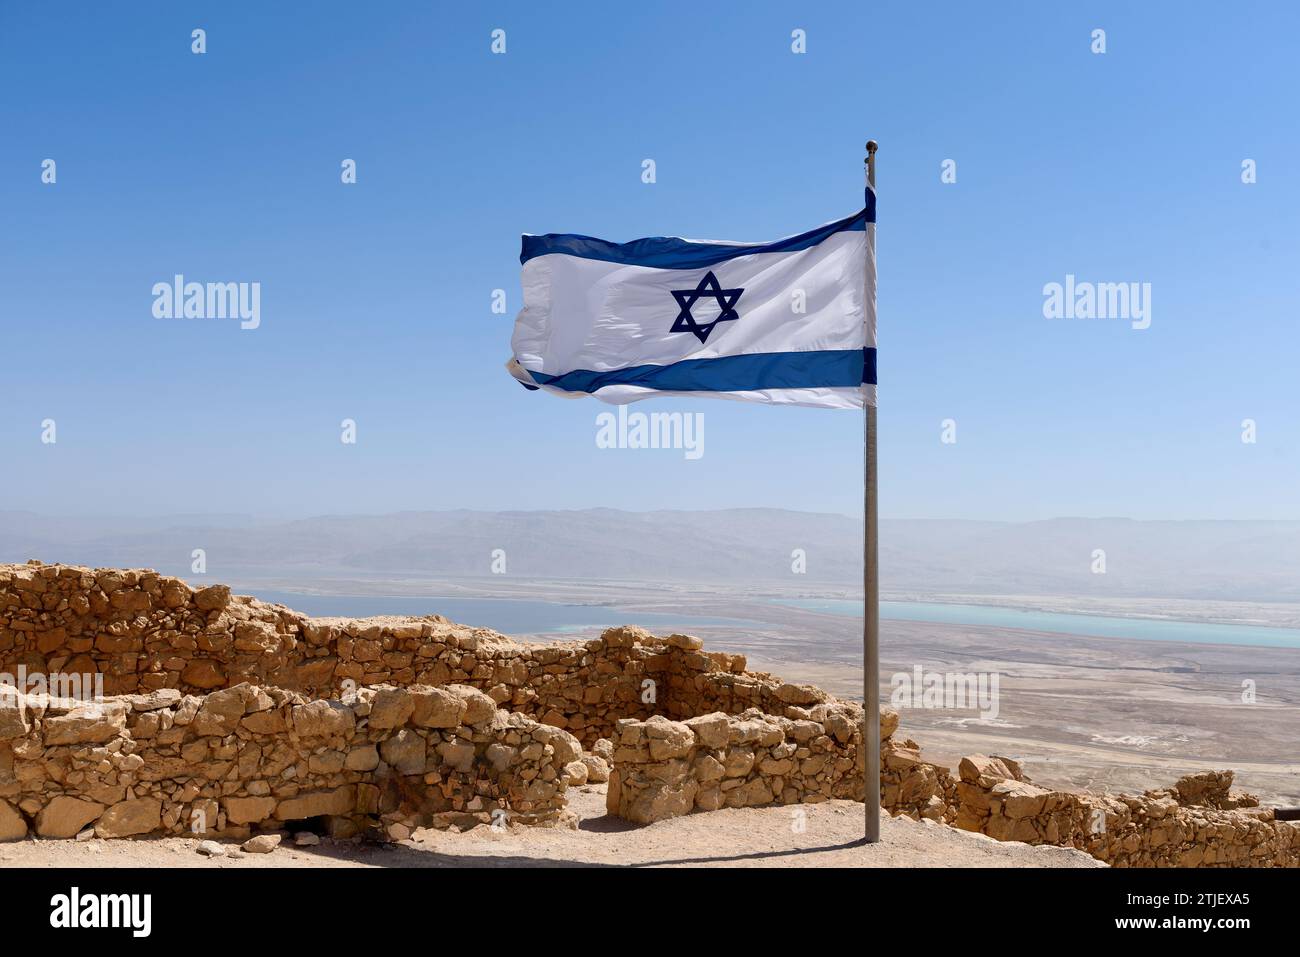 An Israeli flag flying over the fortress of Masada overlooking the Dead Sea. Masada, Southern District, Israel  Masada (Hebrew: מְצָדָה məṣādā, 'fortress'; Arabic: جبل مسعدة) is an ancient fortification in the Southern District of Israel situated on top of an isolated rock plateau, akin to a mesa. It is located on the eastern edge of the Judaean Desert, overlooking the Dead Sea 20 km east of Arad.  Herod the Great built two palaces for himself on the mountain and fortified Masada between 37 and 31 BCE.  Credit: digitaleye/ JdeSousa Stock Photo